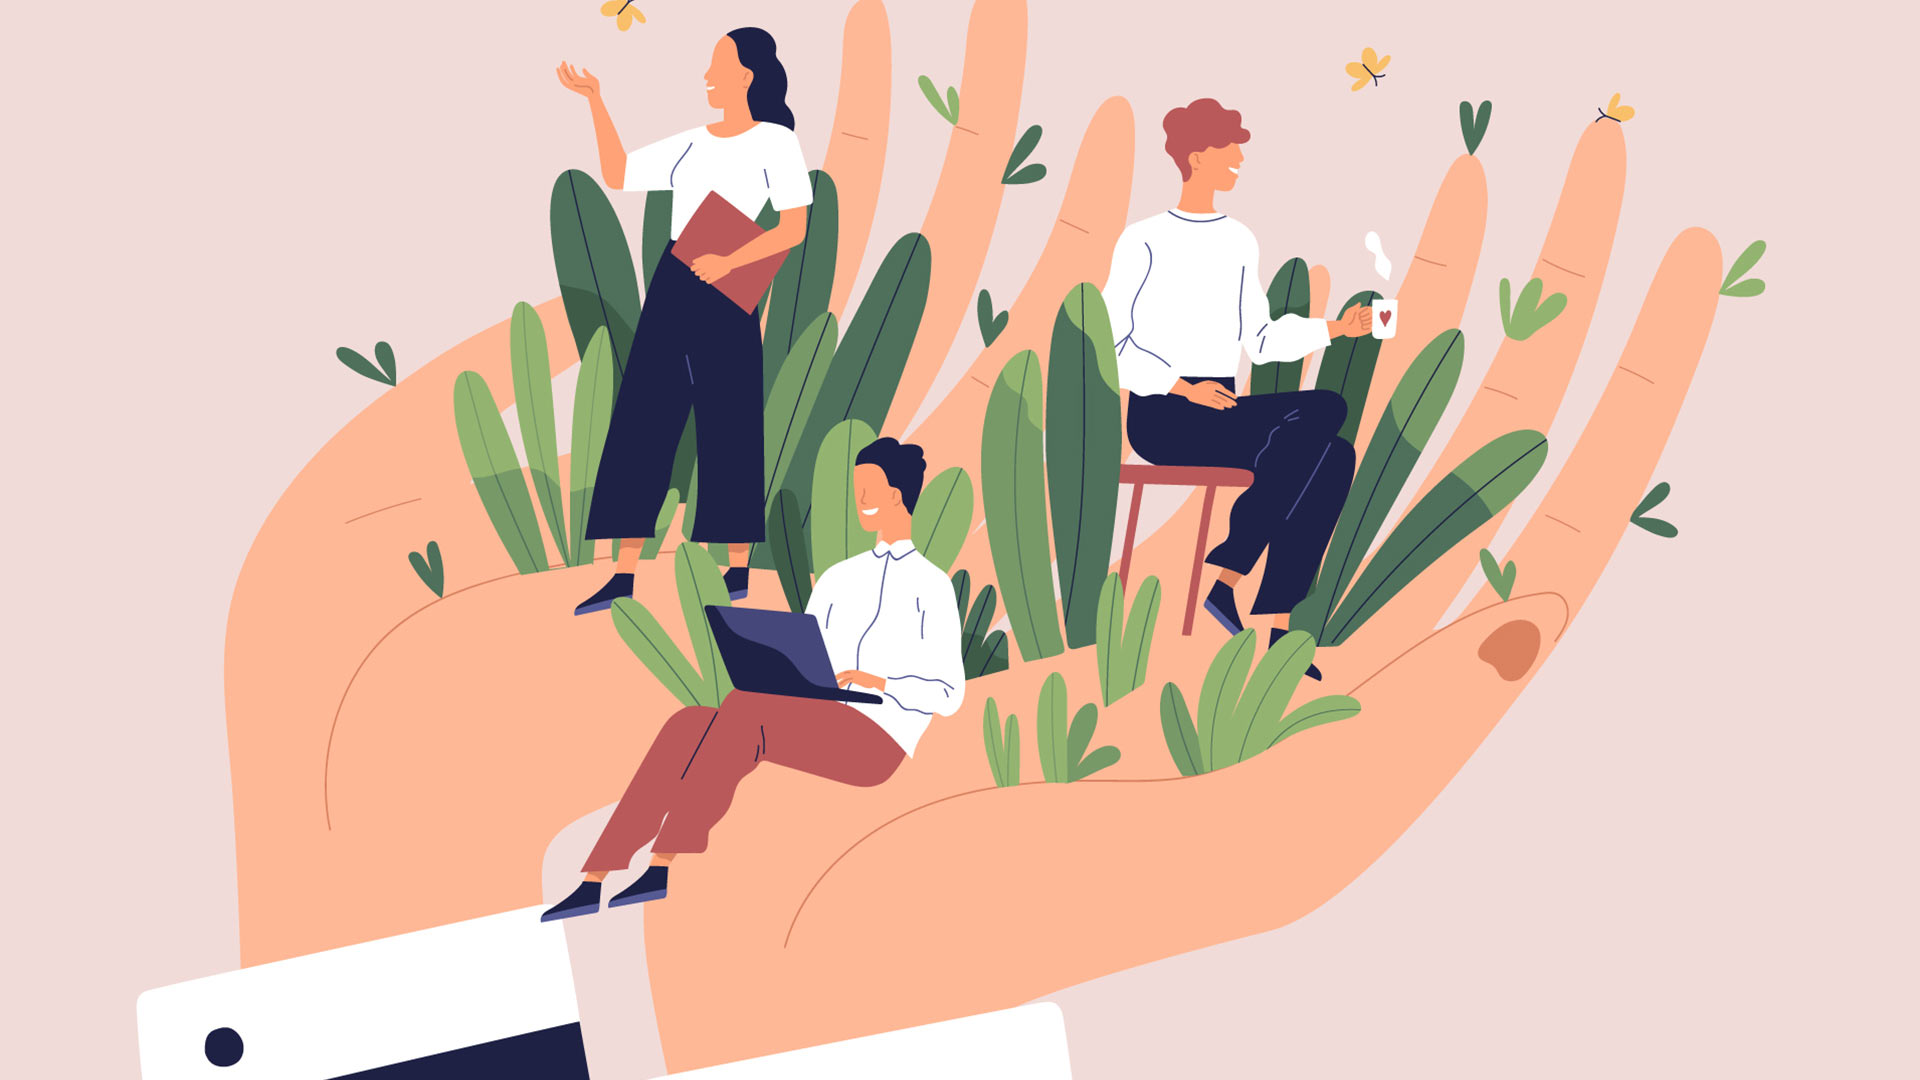 Illustration showing wellbeing in the workplace with 3 employees sitting in a lush oasis stemming from the director's hands